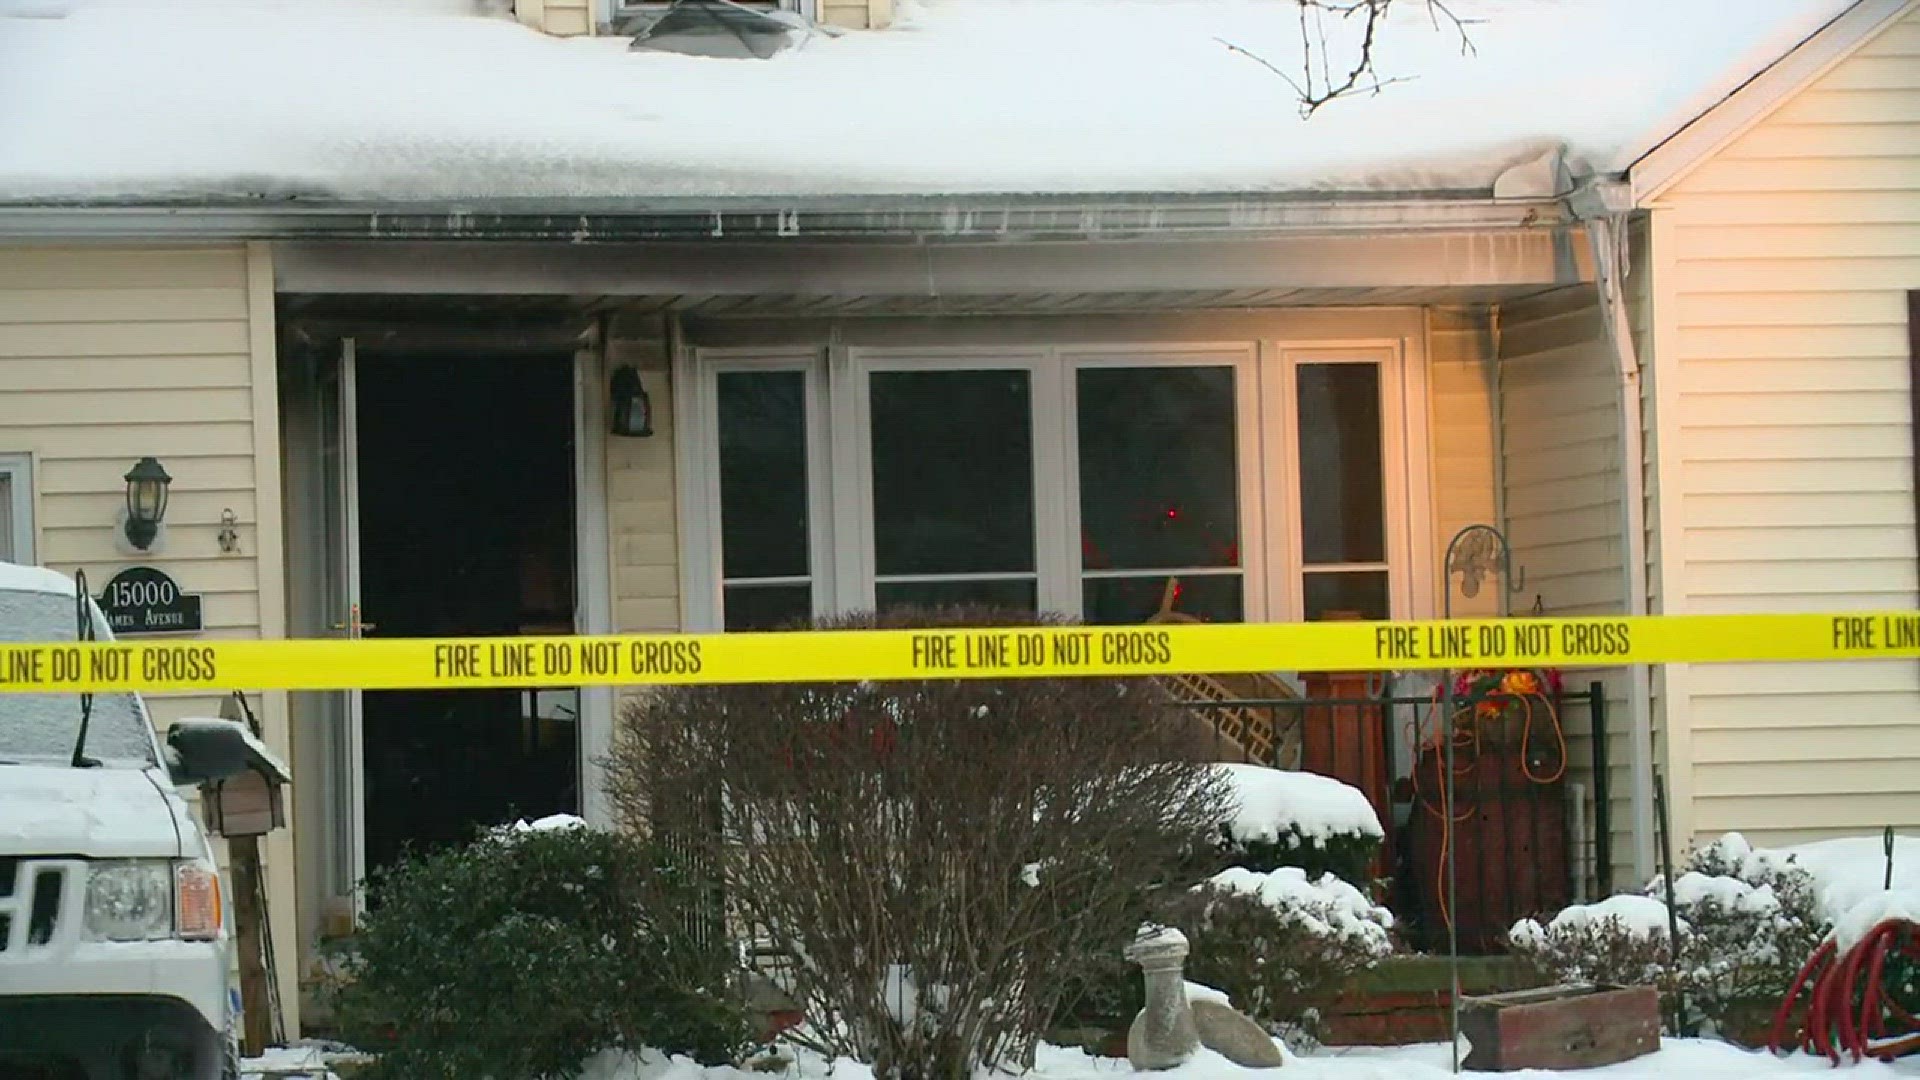 Feb. 8, 2018: One person is confirmed dead following a house fire at a Maple Heights home Thursday morning. The Ohio Dept. of Commerce confirms one female was killed in the blaze at the 1500 block of James Avenue. Her identity has not been released. Anoth